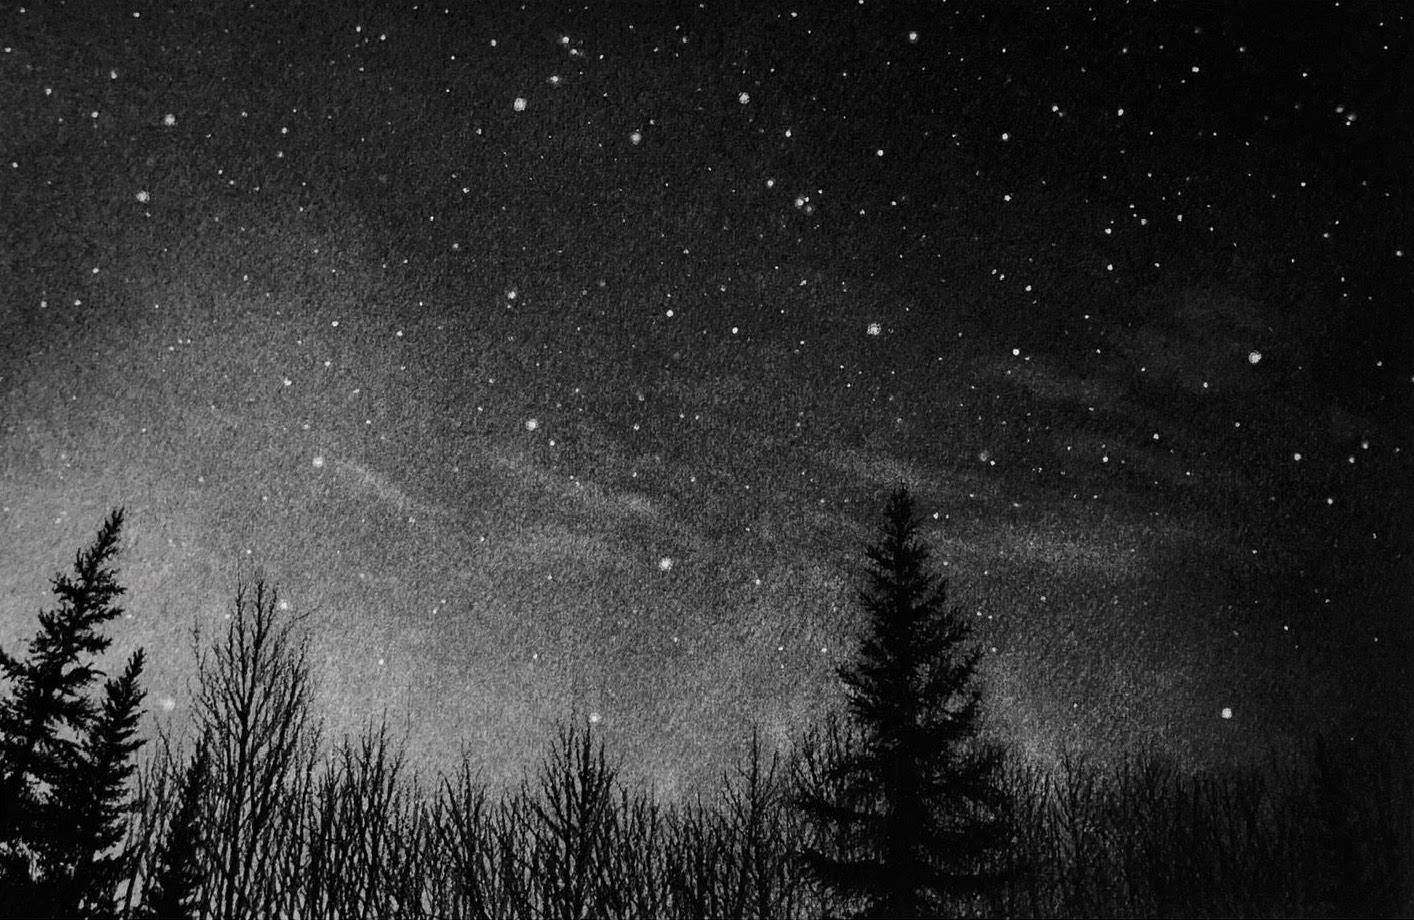 Katherine Curci Figurative Art - Winter Night in Canmore, black and white charcoal drawing of trees and sky